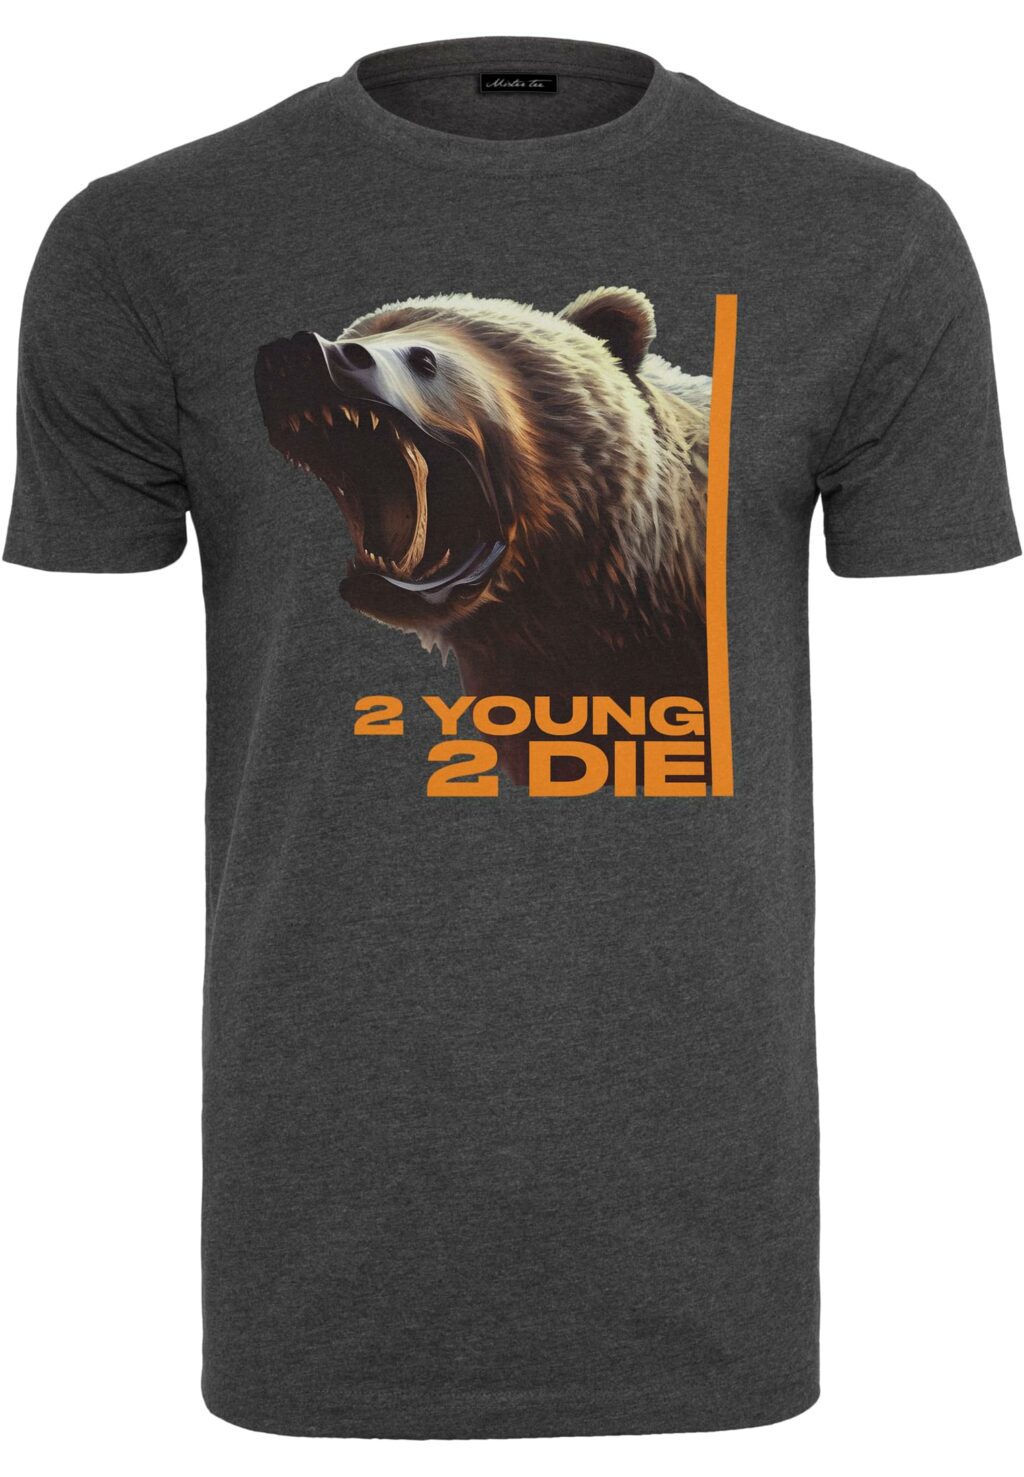 2 Young 2 Die Tee charcoal MT2798